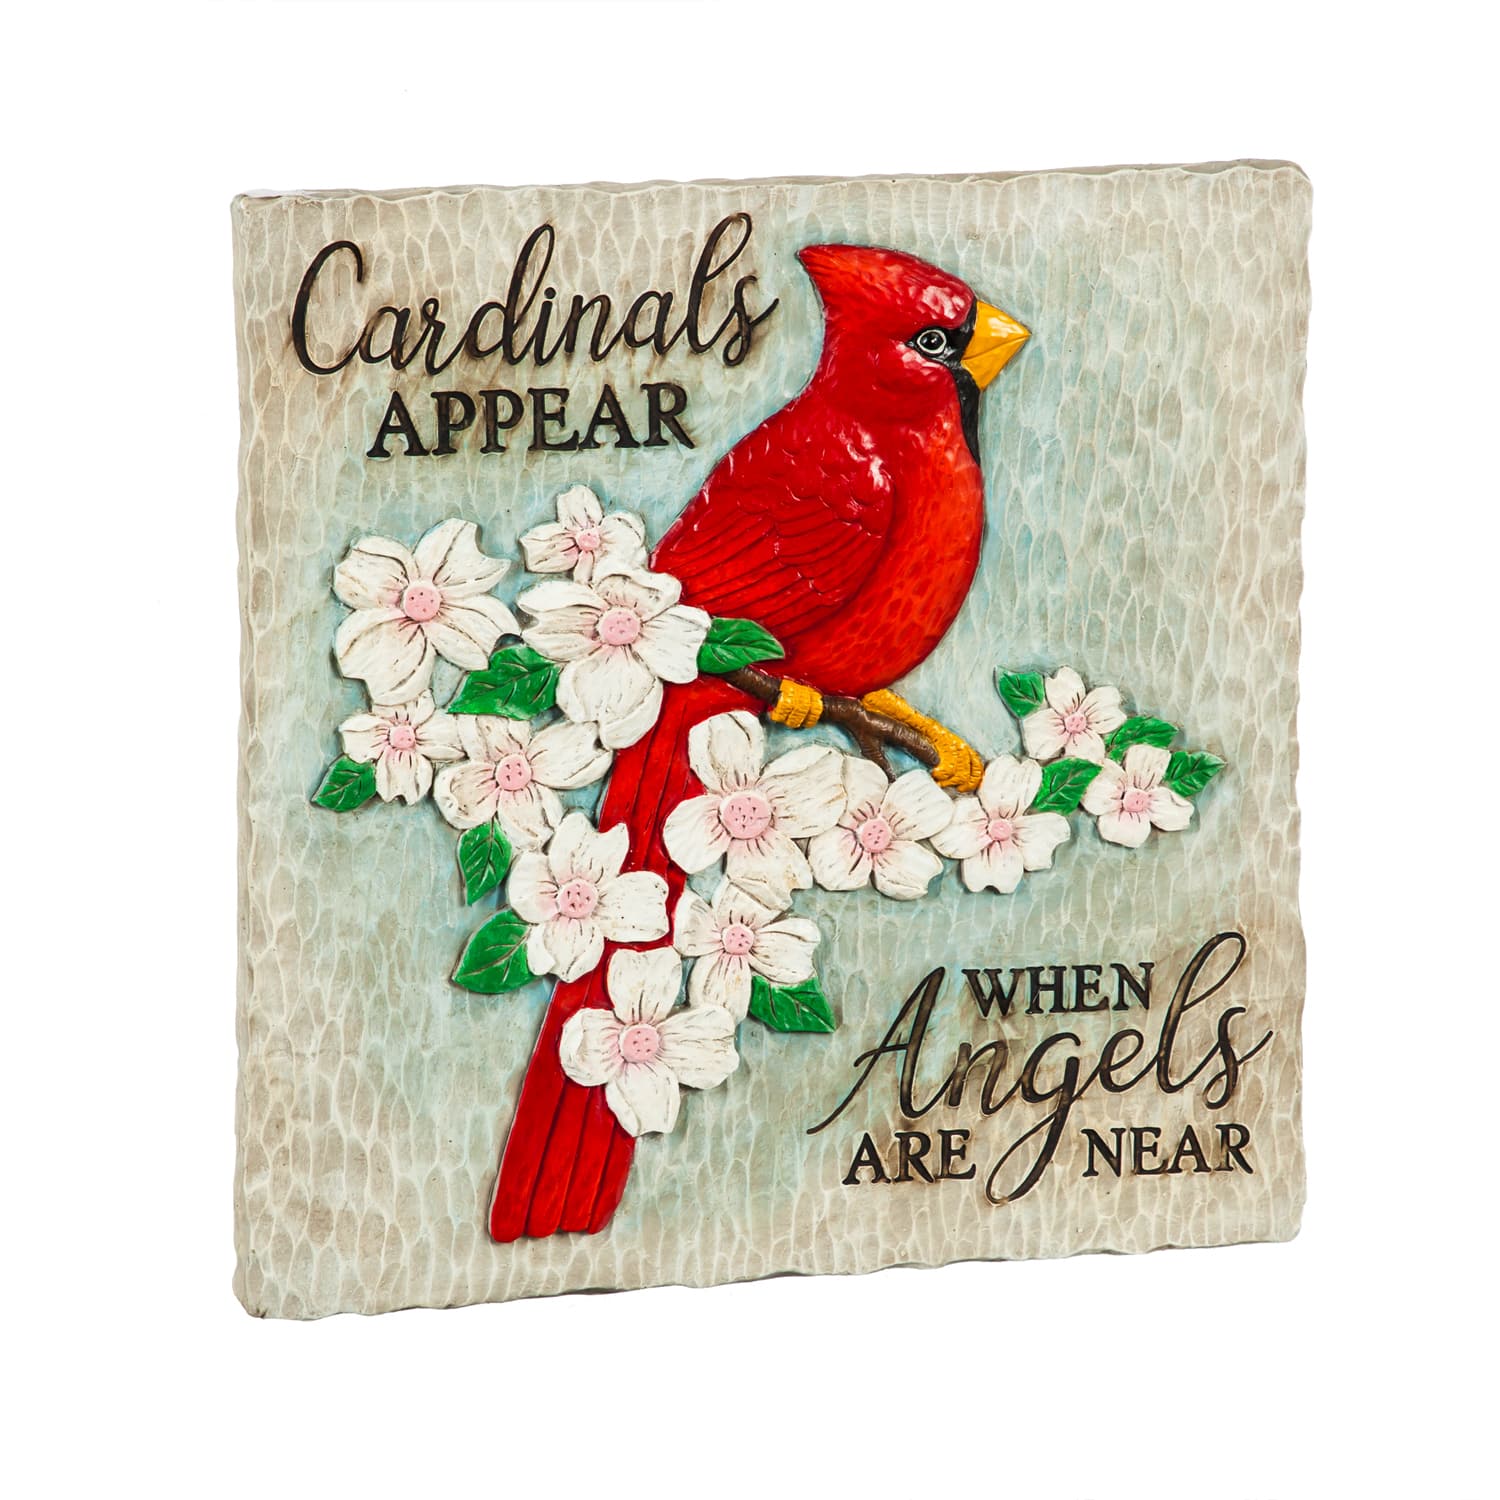 Garden Stone: Cardinals Appear when Angels are Near image